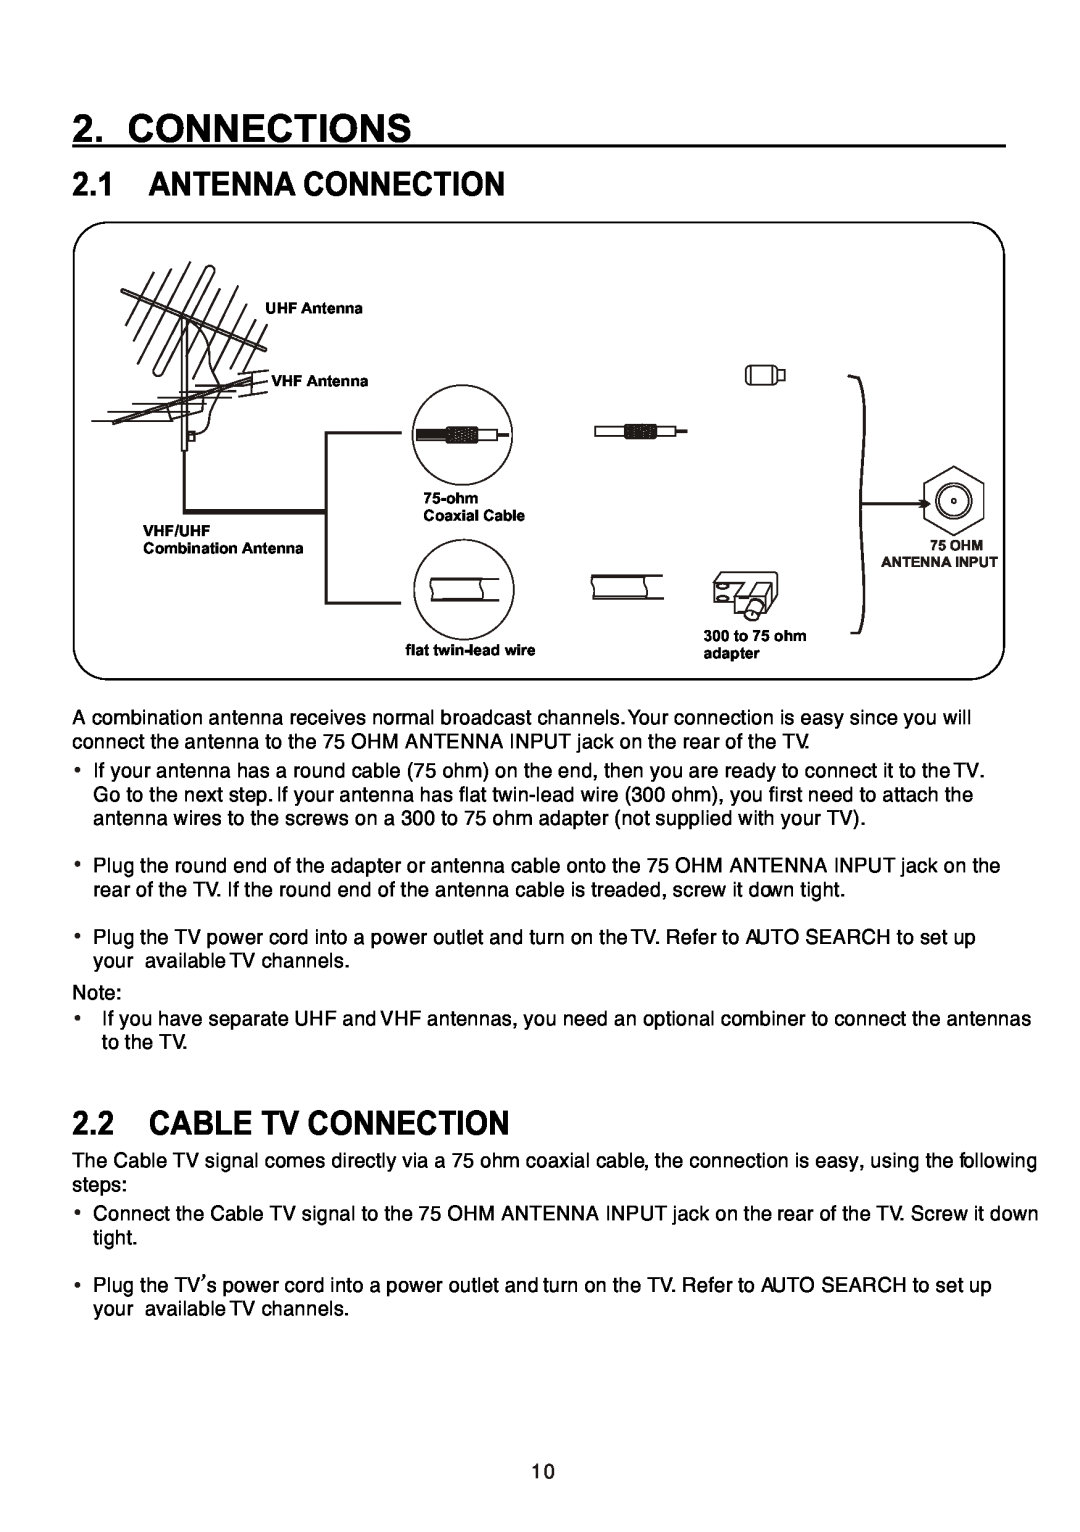 Teac CT-W32ID owner manual Connections, Antenna Connection, Cable Tv Connection 